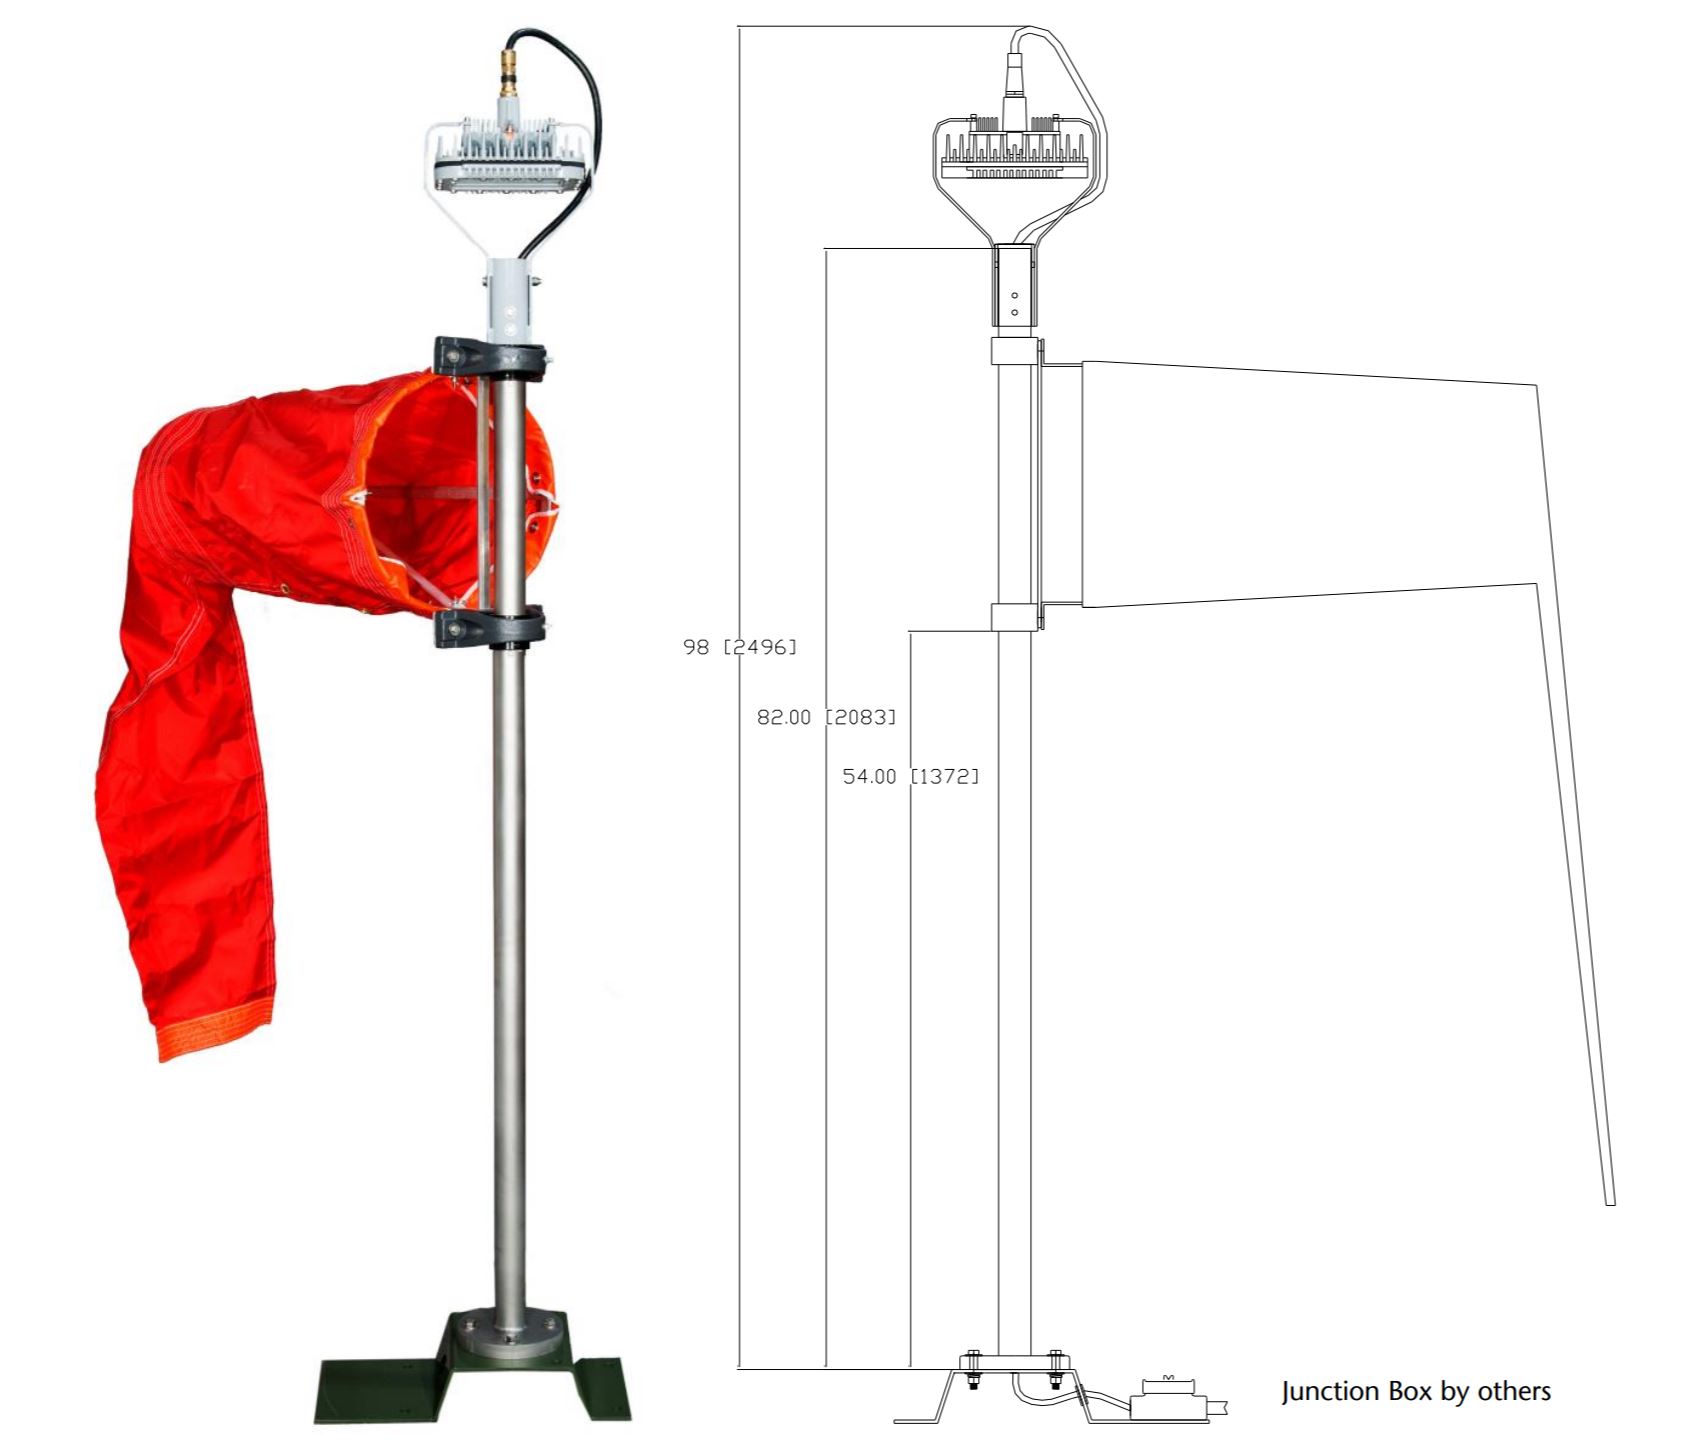 Solar Portable Wind Cone, Airport Solar Windsock, L-806 & L-806(L) Wind Cone, FAA Certified Airport Wind Cones, Internally LED lighted wind cone, Wind Cone L-806 & L-806(L) Wind Cone, FAA Certified Airport Wind Cones, L-806 Wind Cone provides a visual indication of wind direction and velocity, L-807 Wind Cone provides a visual indication of wind direction and velocity, L-806 & L-807 Wind Cone Light Kits. Solar Permanent LED Wind Cone, Solar Series Portable LED Wind Cone. Airport / Heliport Nylon Windsocks